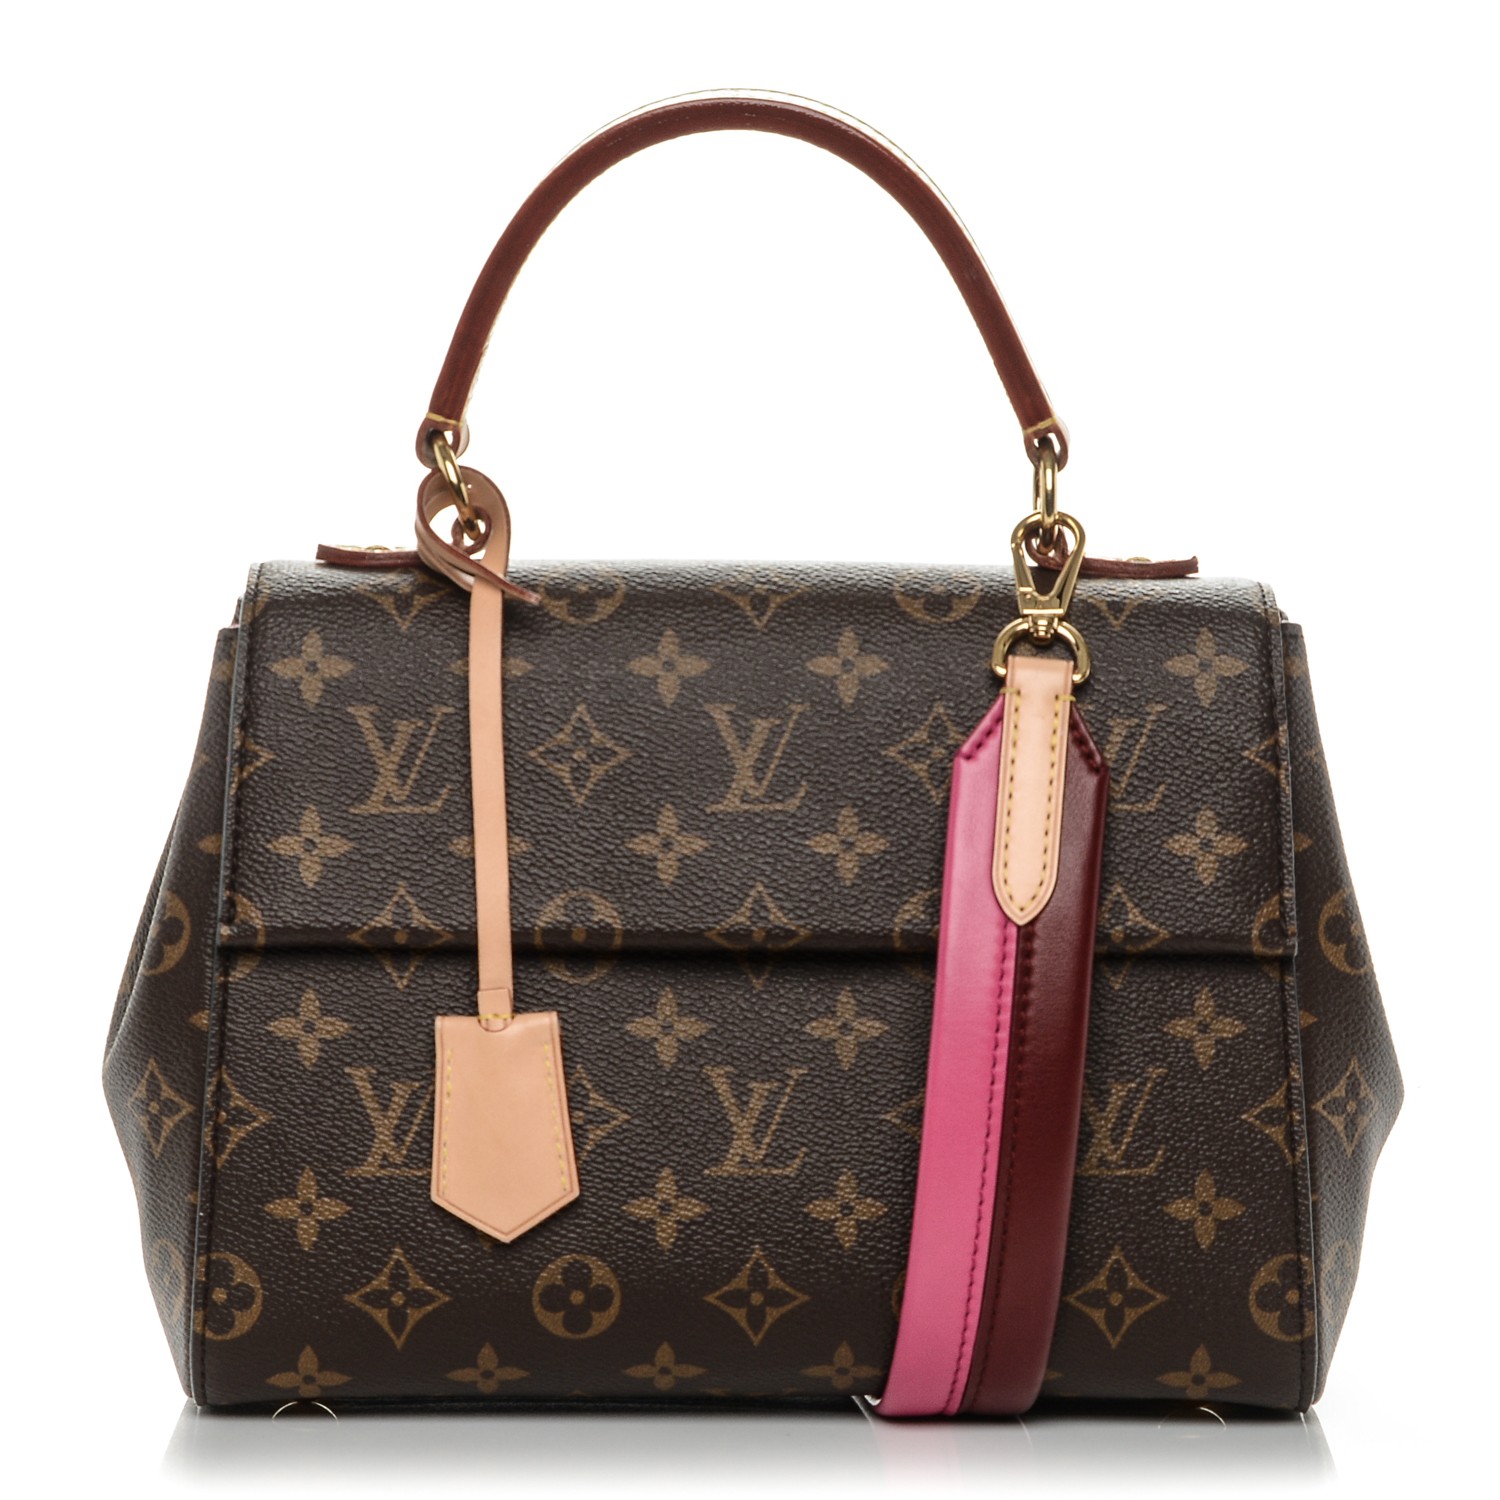 Lv Cluny Bag Review  Natural Resource Department